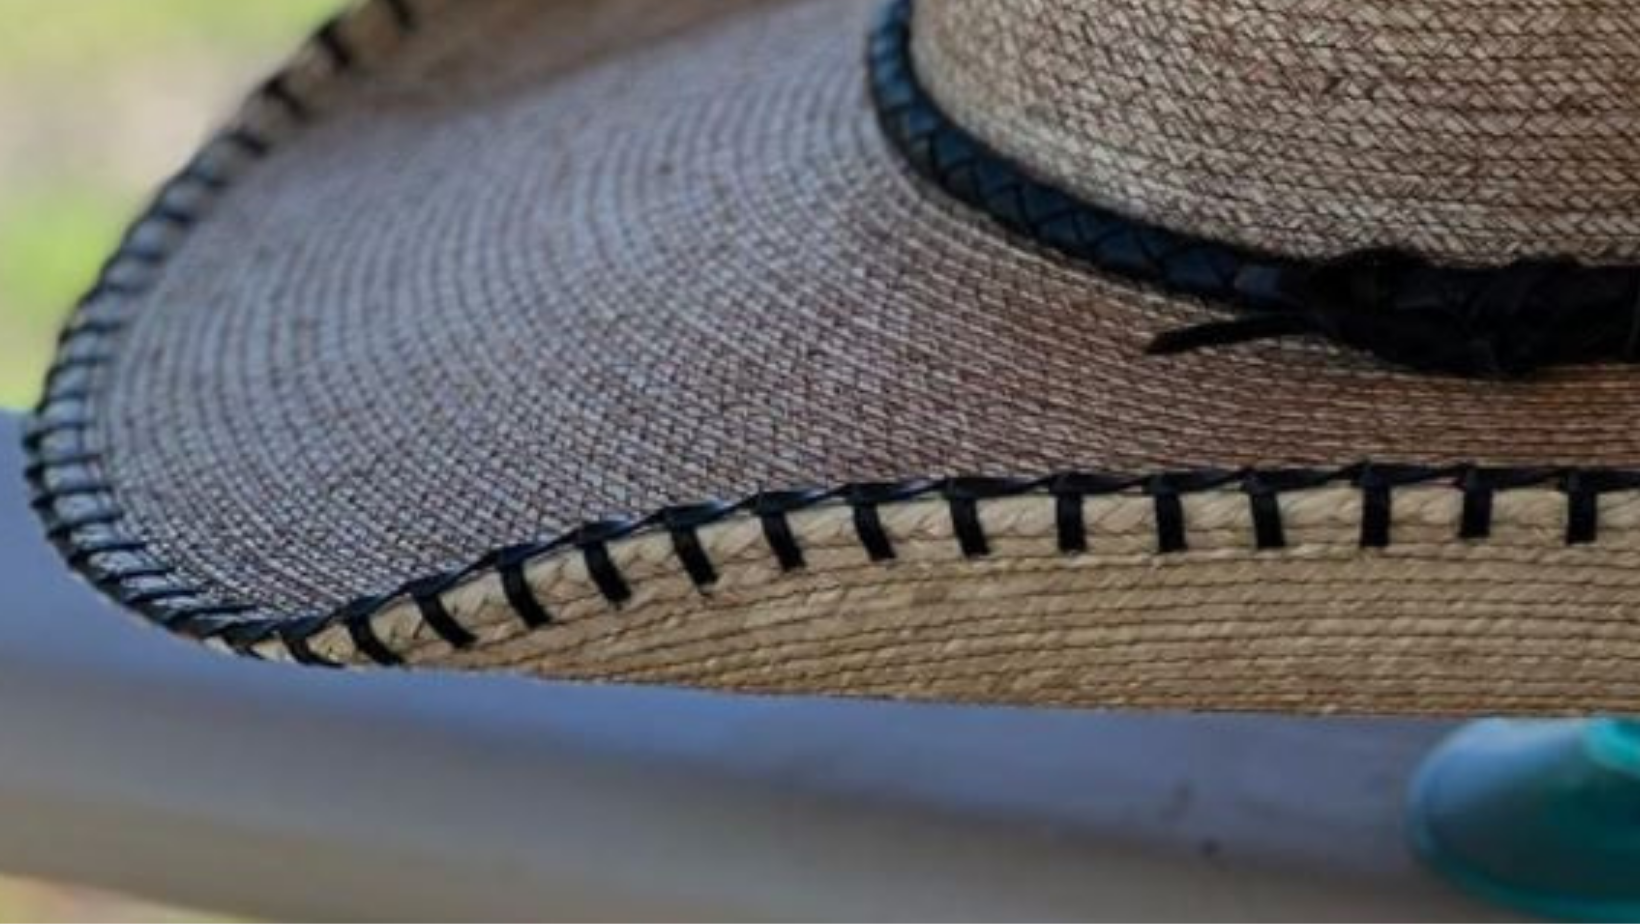 Jaxonbilt_Hats_are_Australian_made_palm_leaf_hats_and_crossbred_hats_for_cowgirls_and_cowboys_with_wide_brims_for_sun_protection_5”_brim_trim_on_edge_wide_crown_band_blanket_stitched_edge_dark_oak